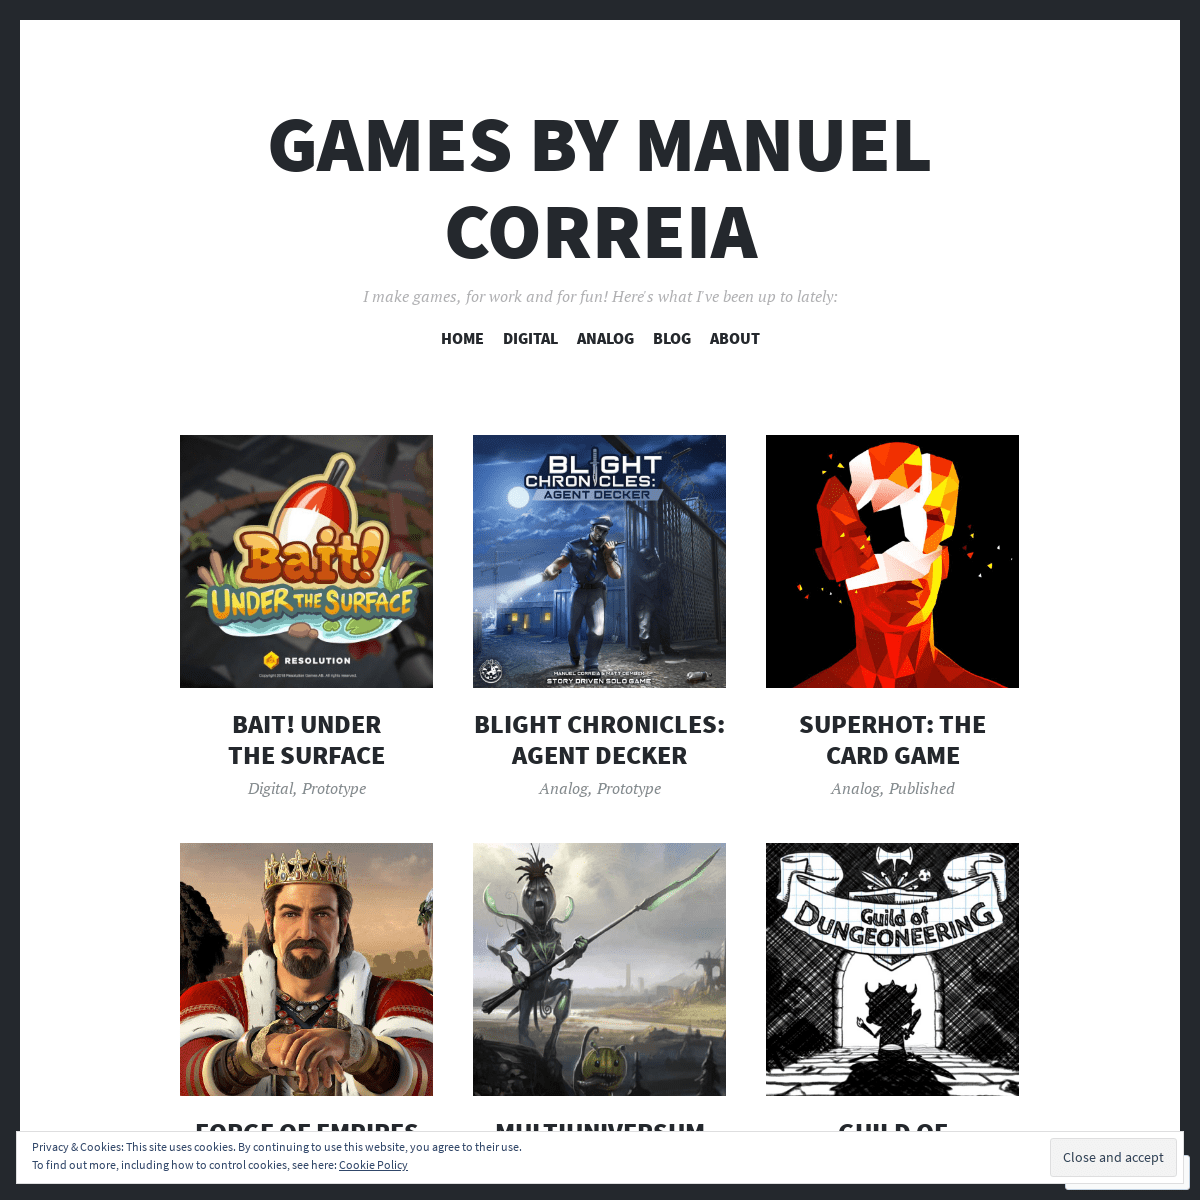 Games by Manuel Correia – I make games, for work and for fun! Here's what I've been up to lately: